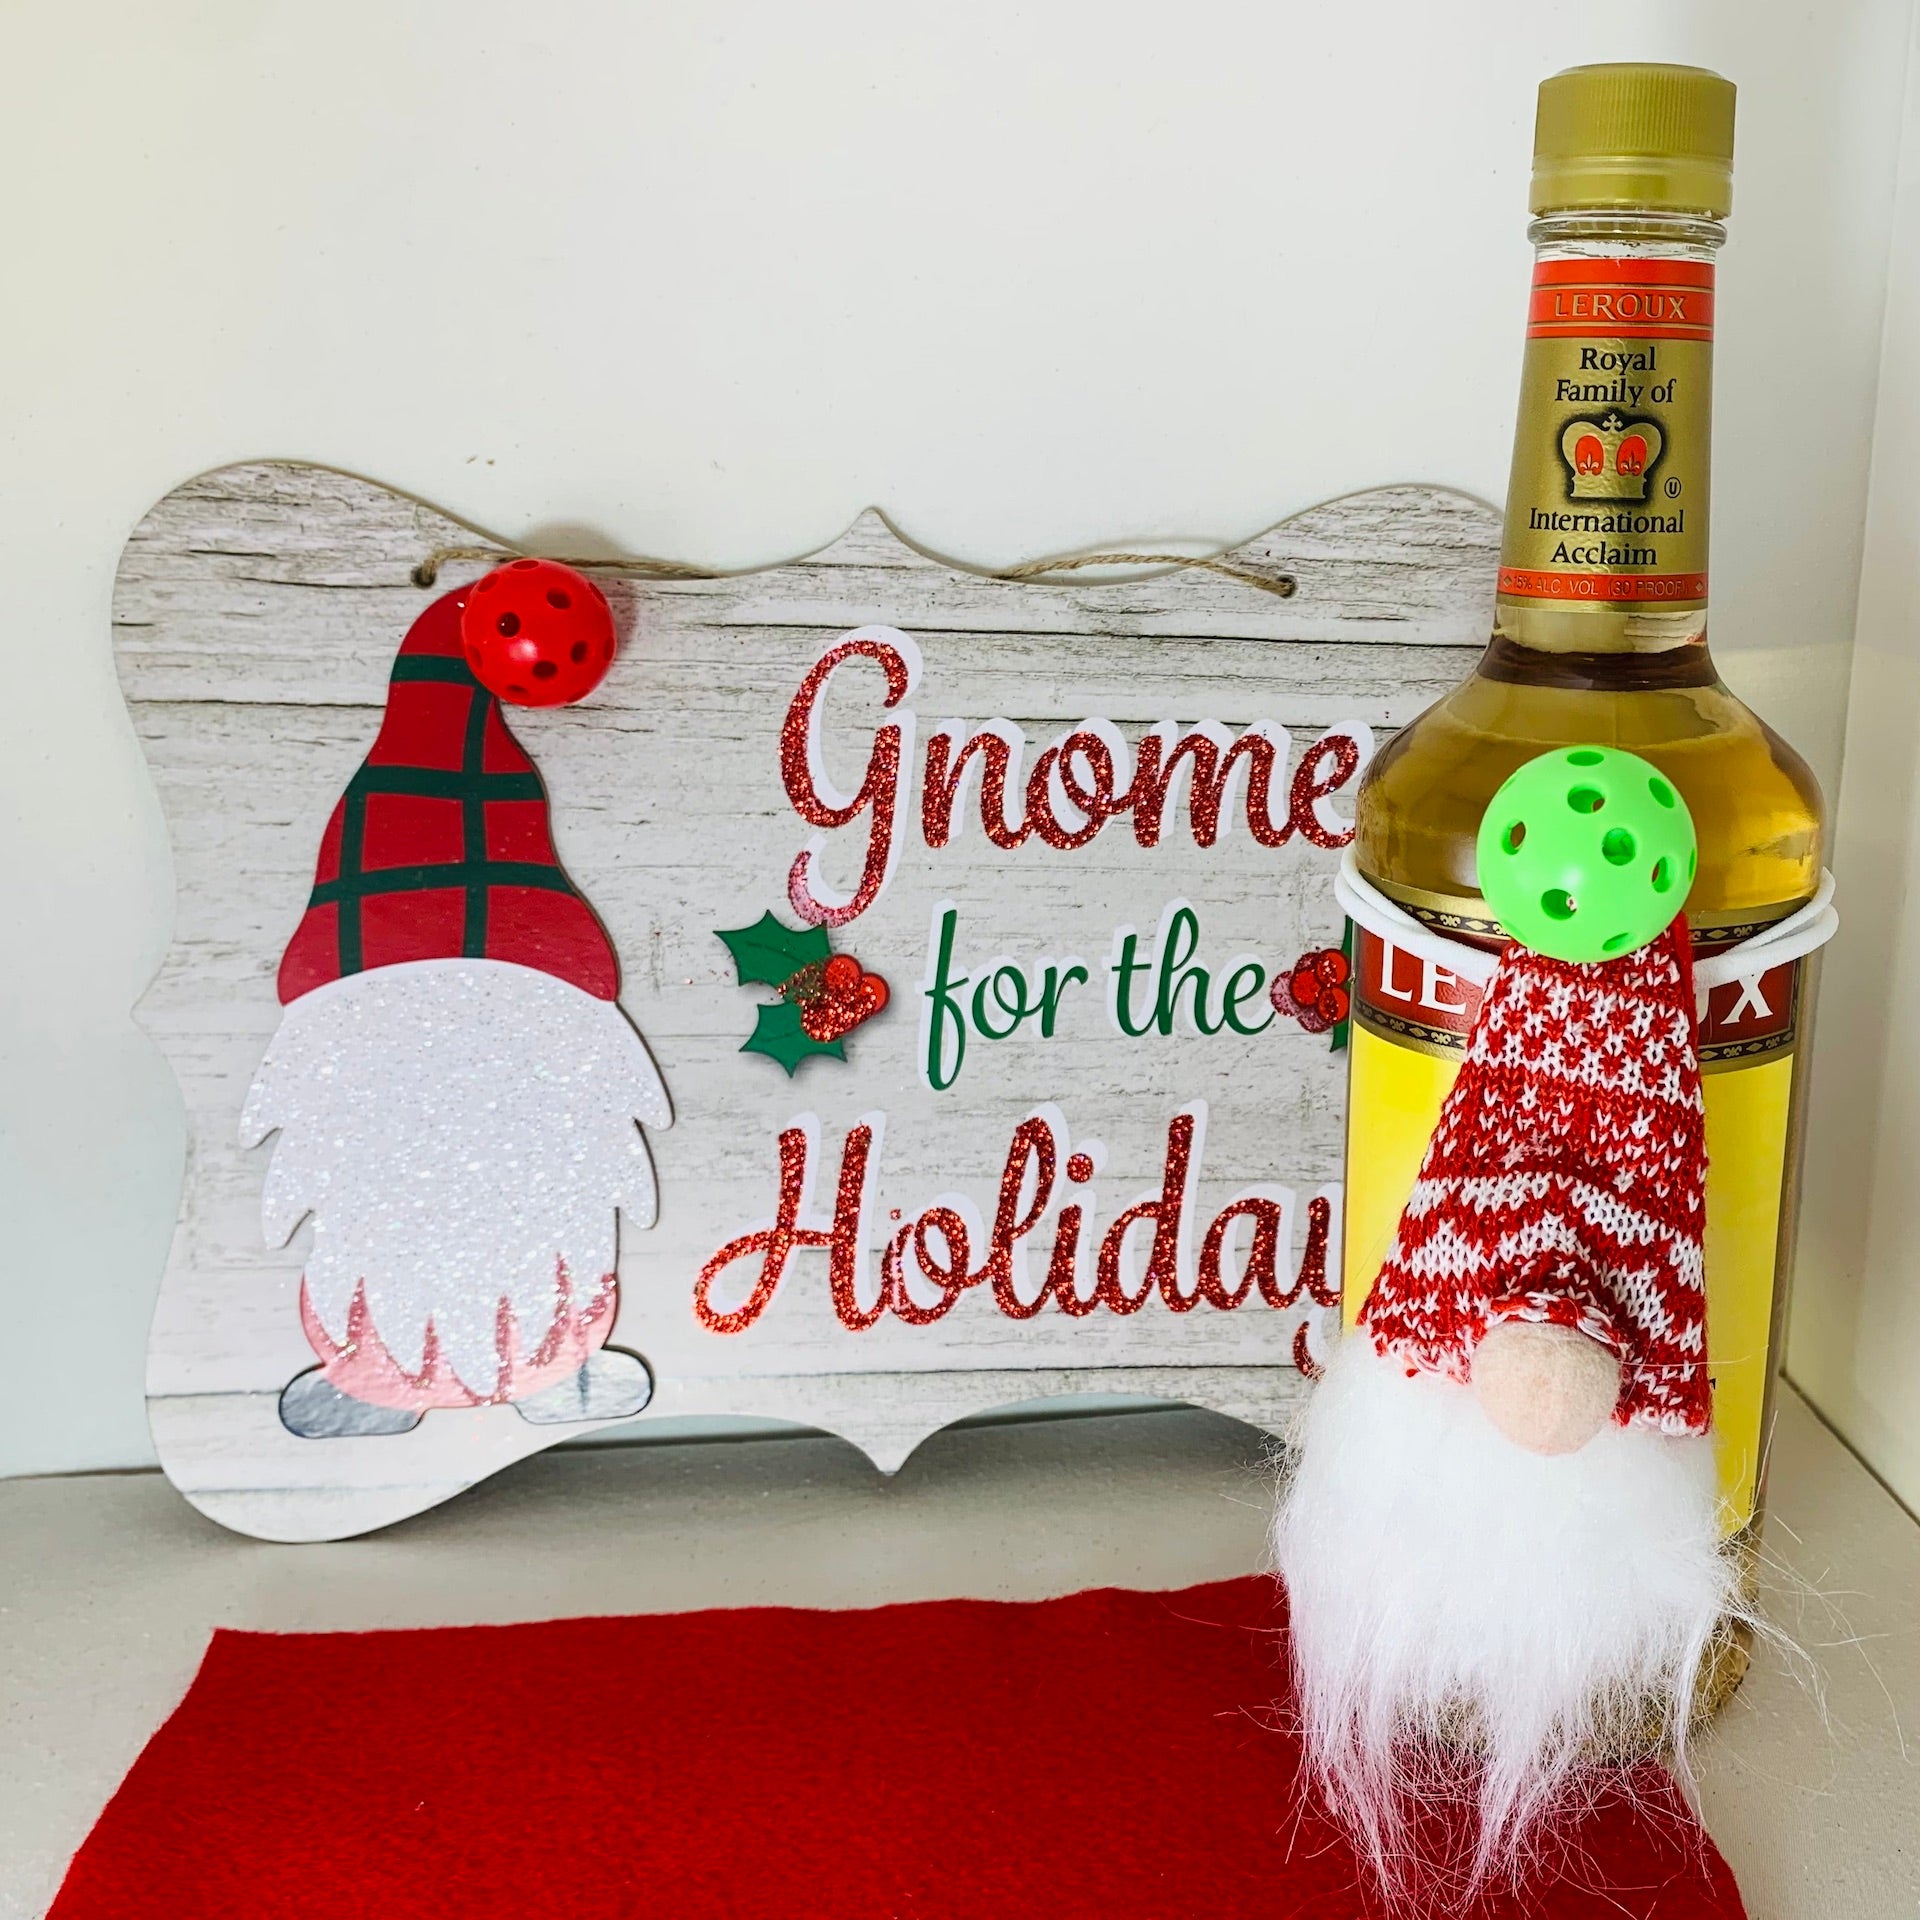 PICKLEBALL GNOME WINE BOTTLE TOPPER-HOUSEWARMING GIFT Make a statement this Christmas by giving a gift wrapped in Style. You will make an entrance at your next holiday pickleball gathering with this cute pickleball wine topper. Your wine and spirits gifts for friends and loved ones will be extra-special with these darling Pickleball Gnome toppers!